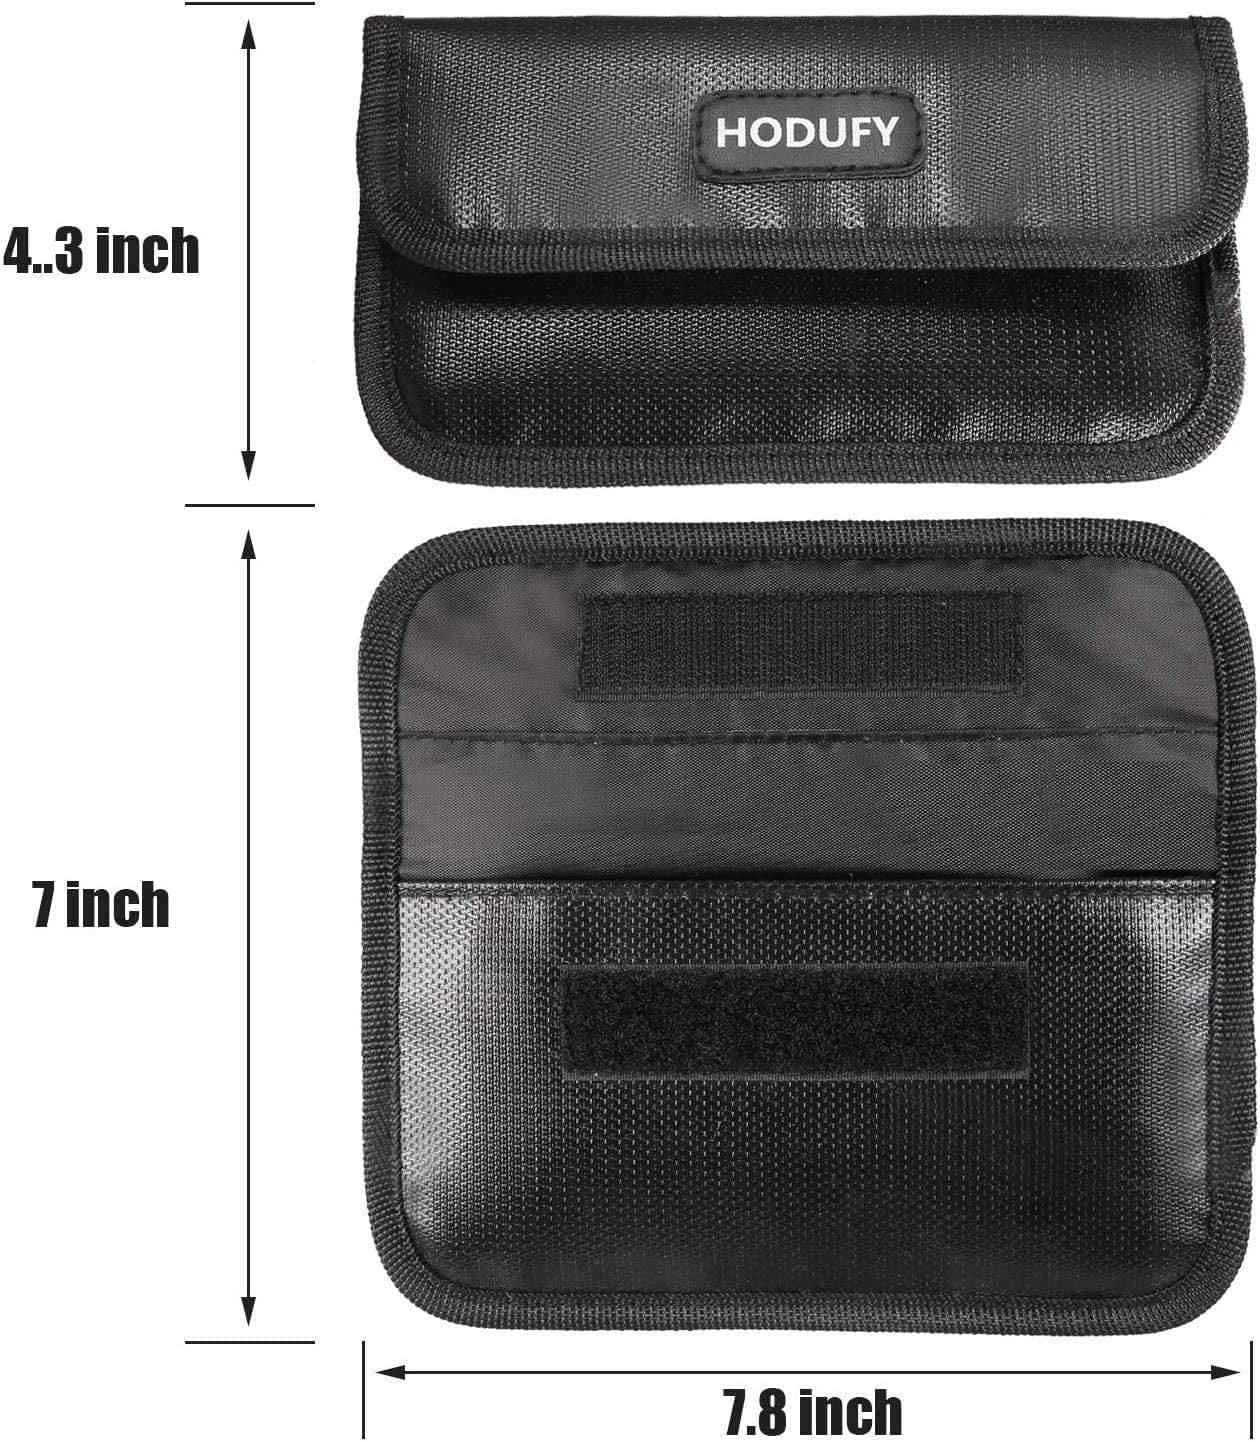 Black RFID Signal Blocking Bag Shielding Pouch Wallet Case for Cell Phone Privacy Protection and Car Key FOB Hodufy Fireproof Faraday Bag 